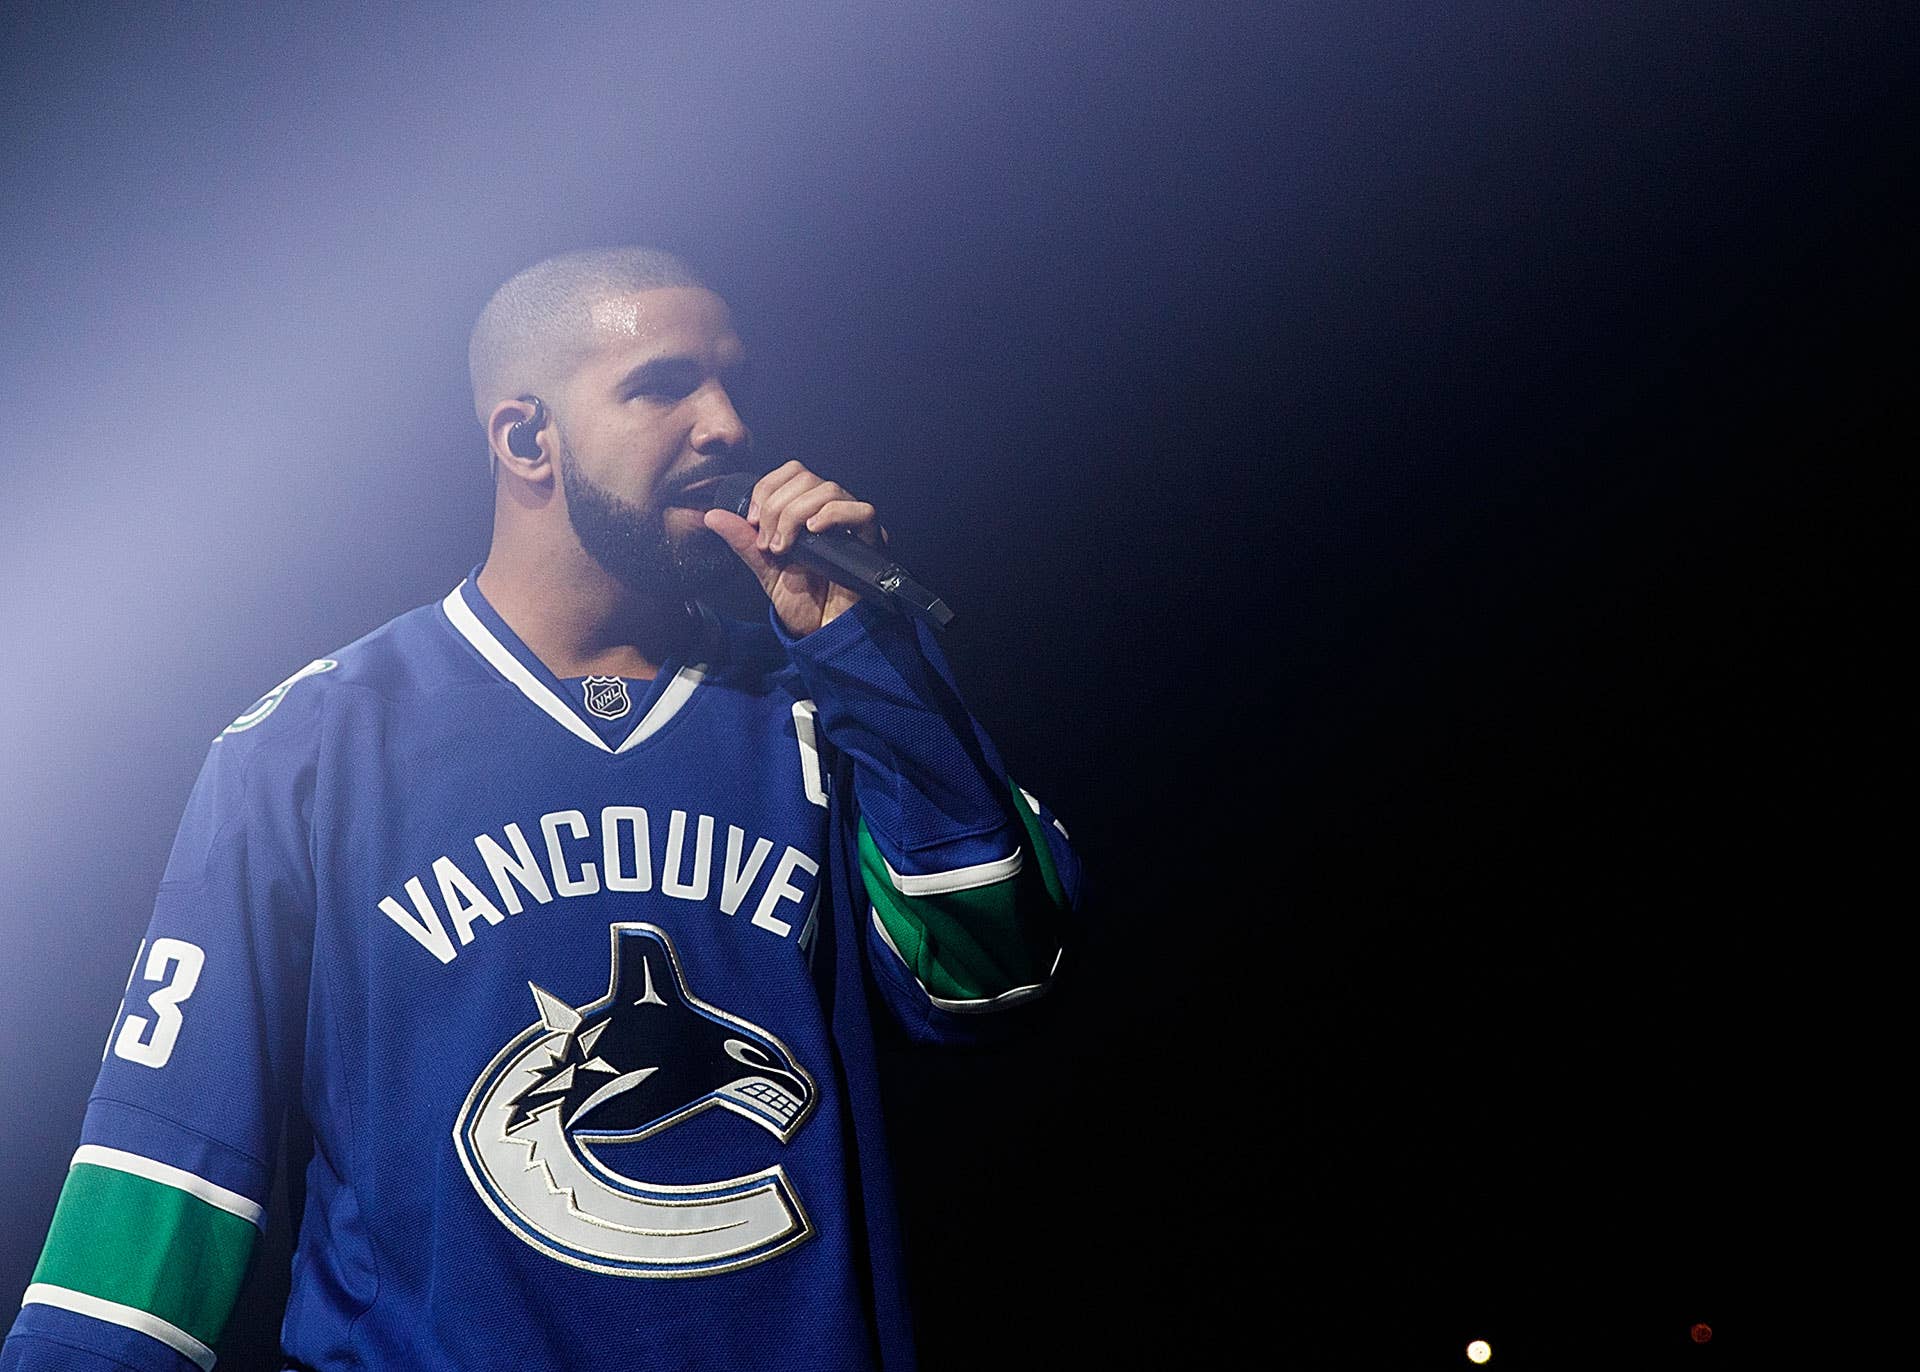 Drake performing in Vancouver wearing Canucks jersey